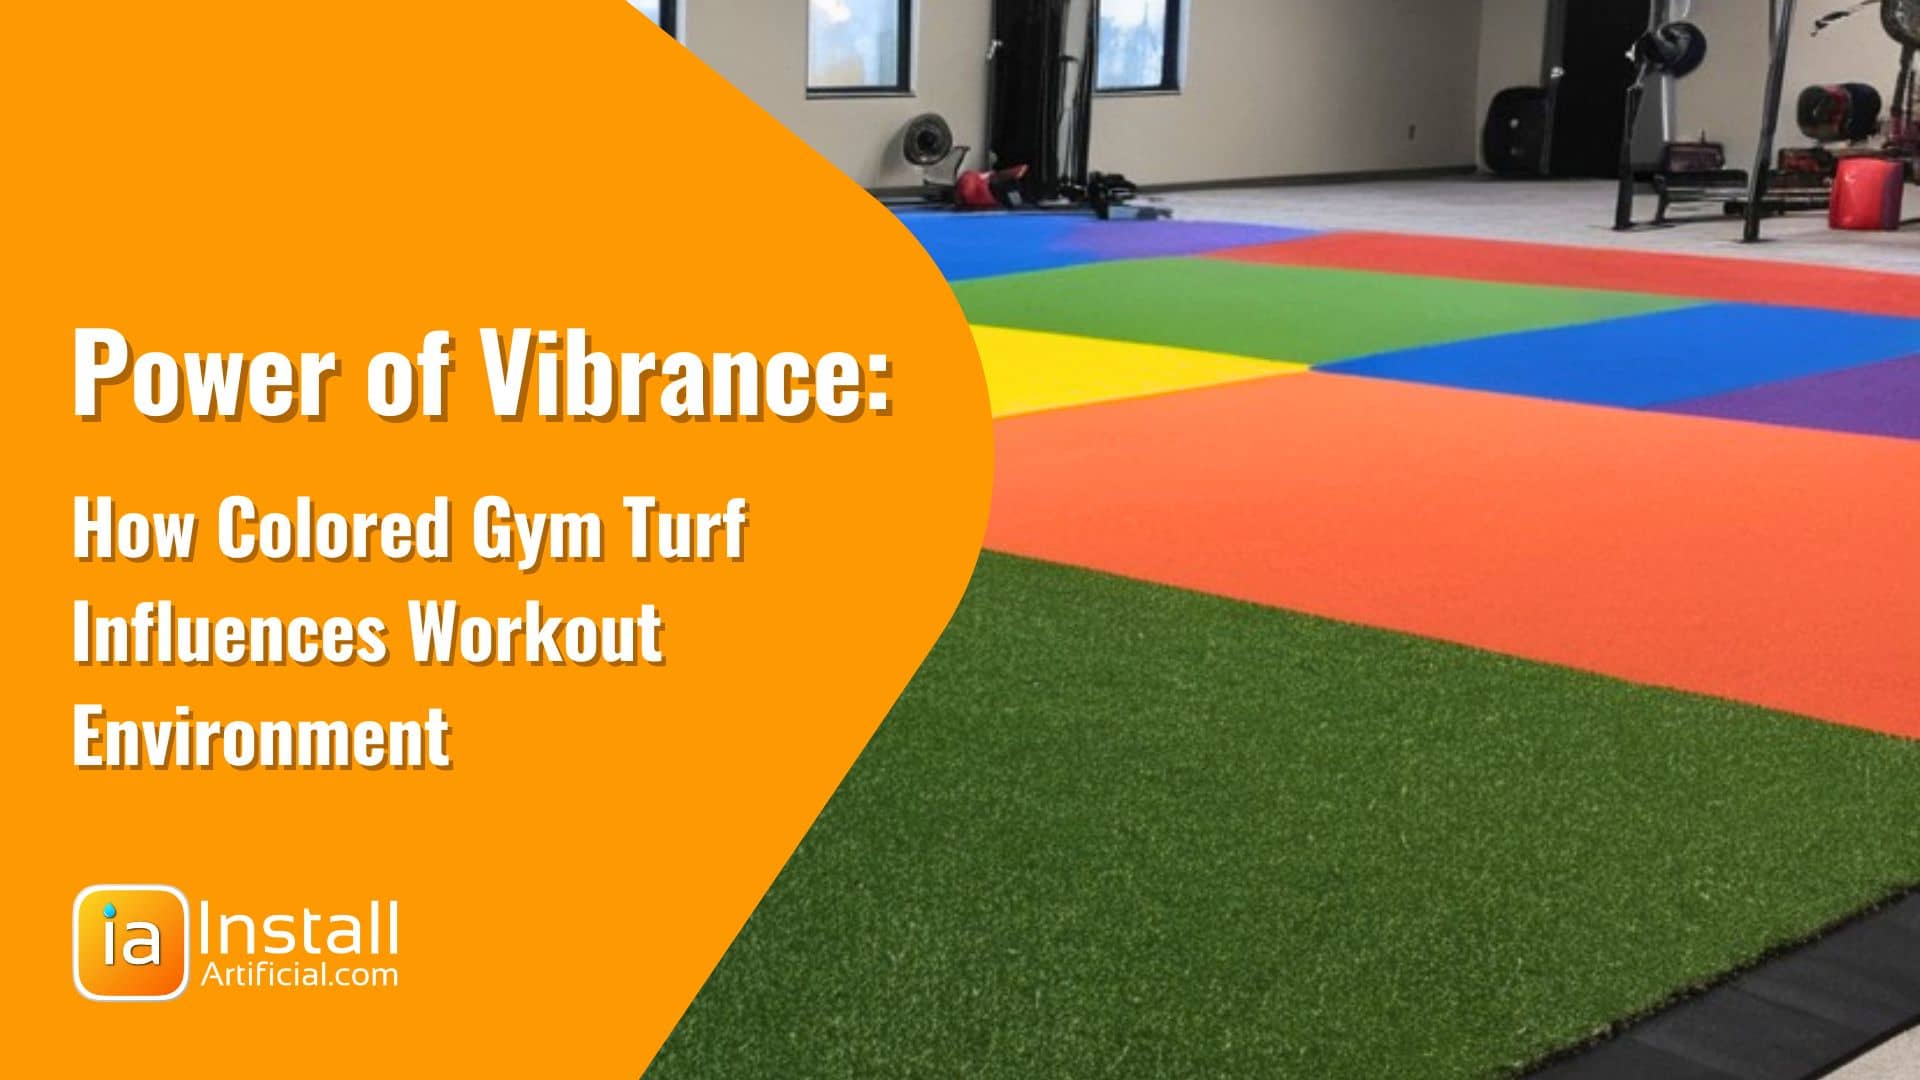 https://2357342.fs1.hubspotusercontent-na1.net/hubfs/2357342/Blog/The%20Power%20of%20Color%20How%20Colored%20Gym%20Turf%20Influences%20Workout%20Environment/How%20colored%20gym%20turf%20influences%20workout%20environment.jpg